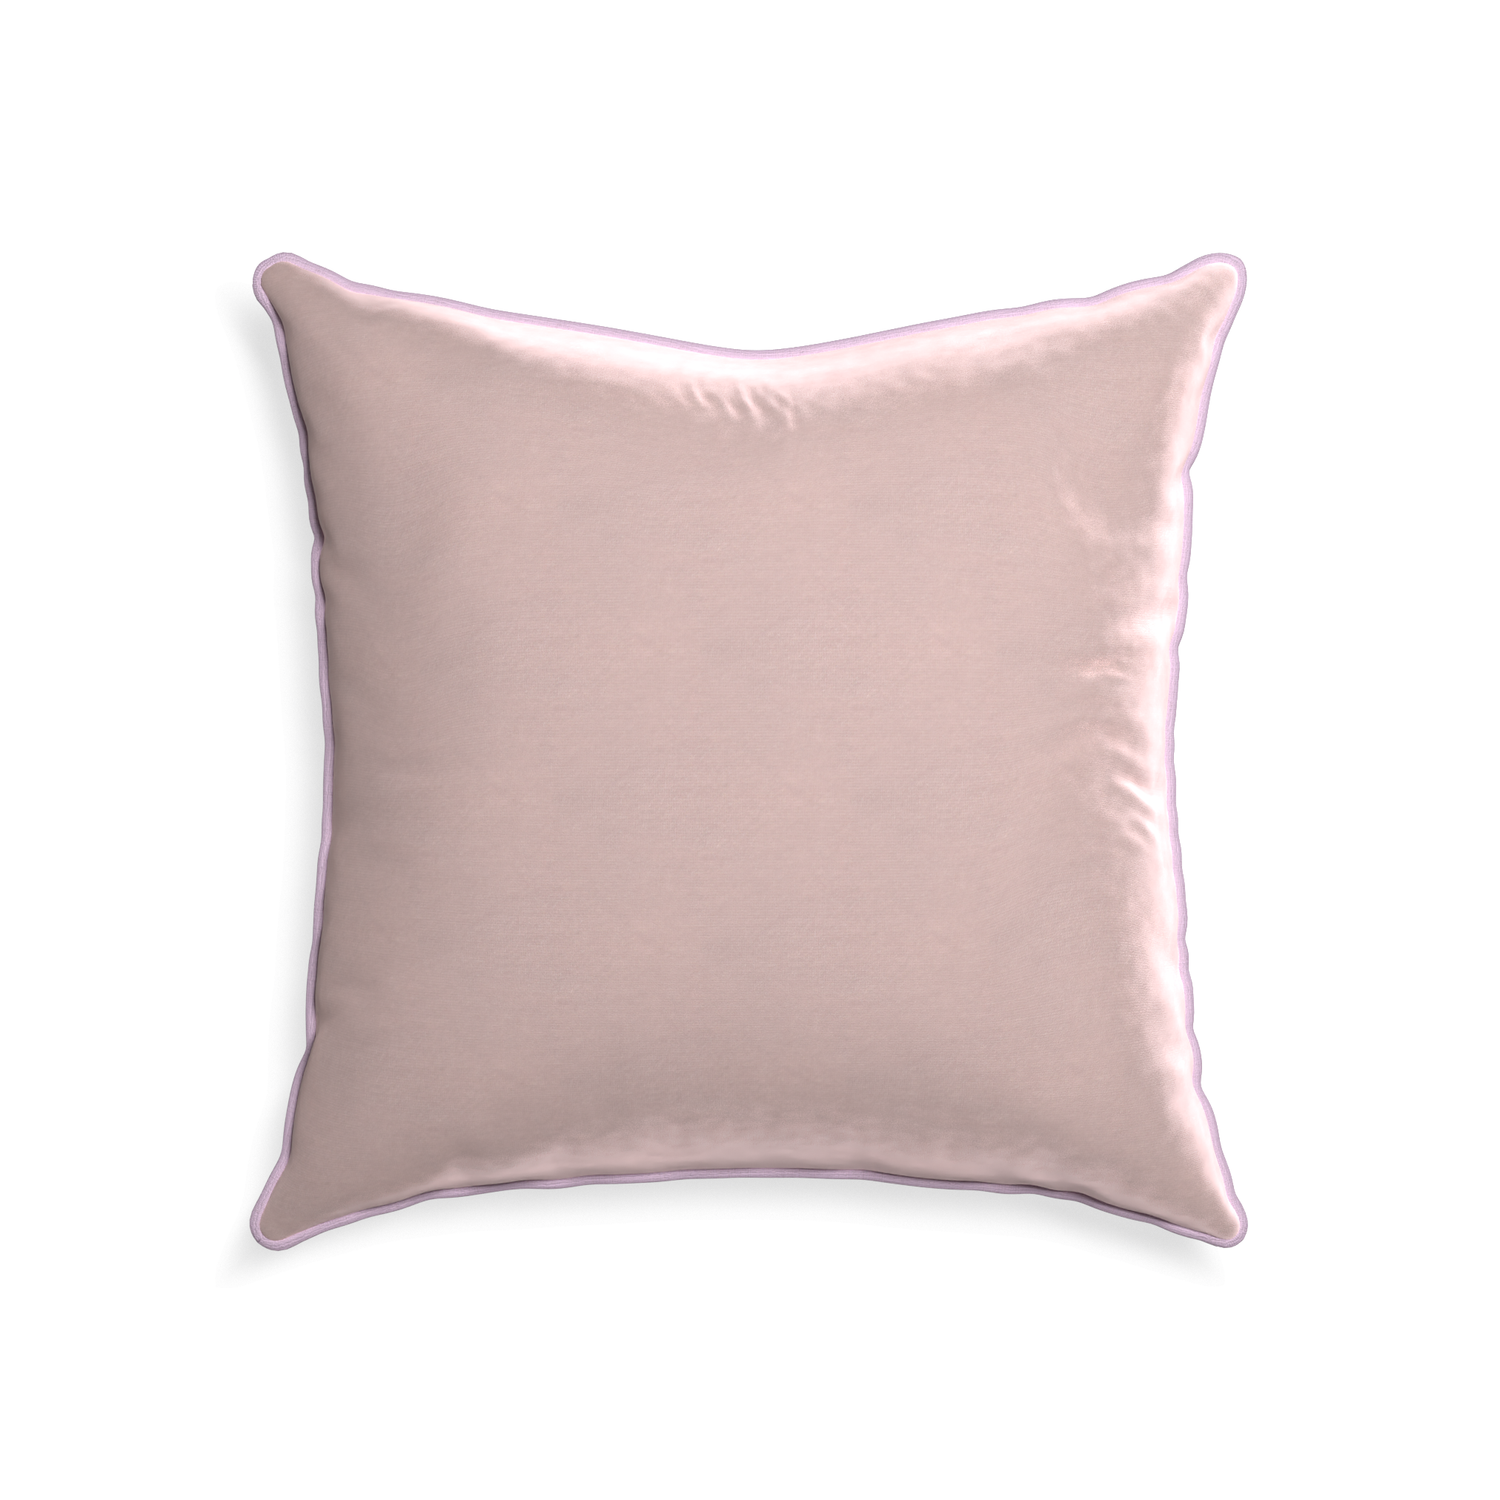 square light pink velvet pillow with lilac piping